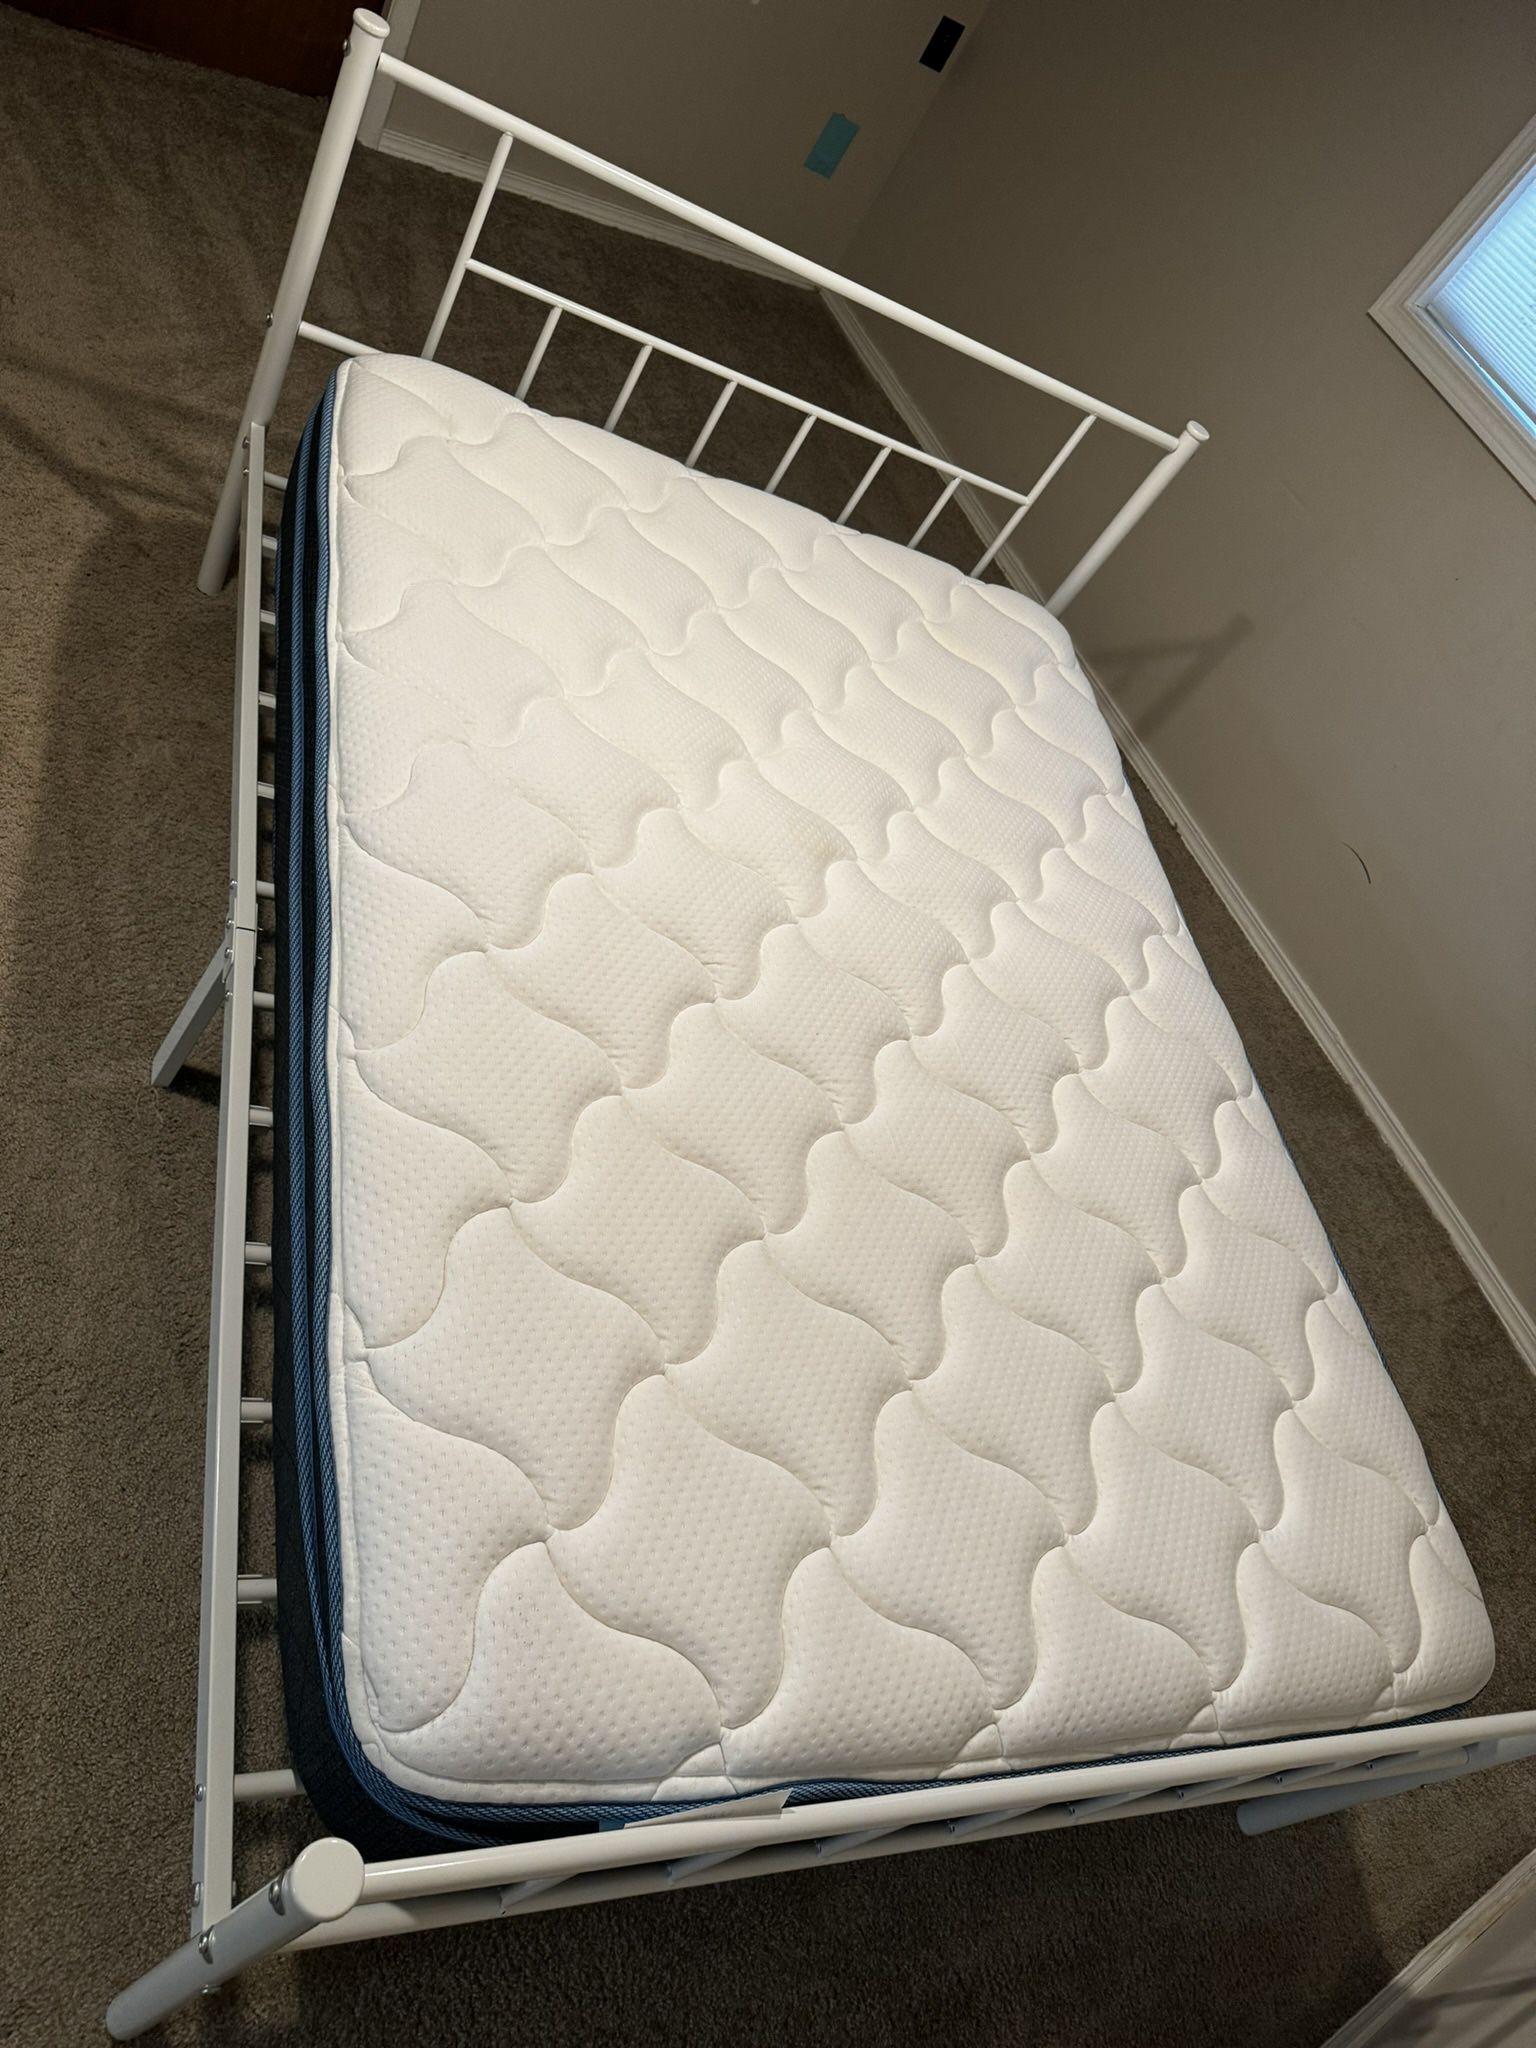 Full Size Mattress With White Metal Bed Frame